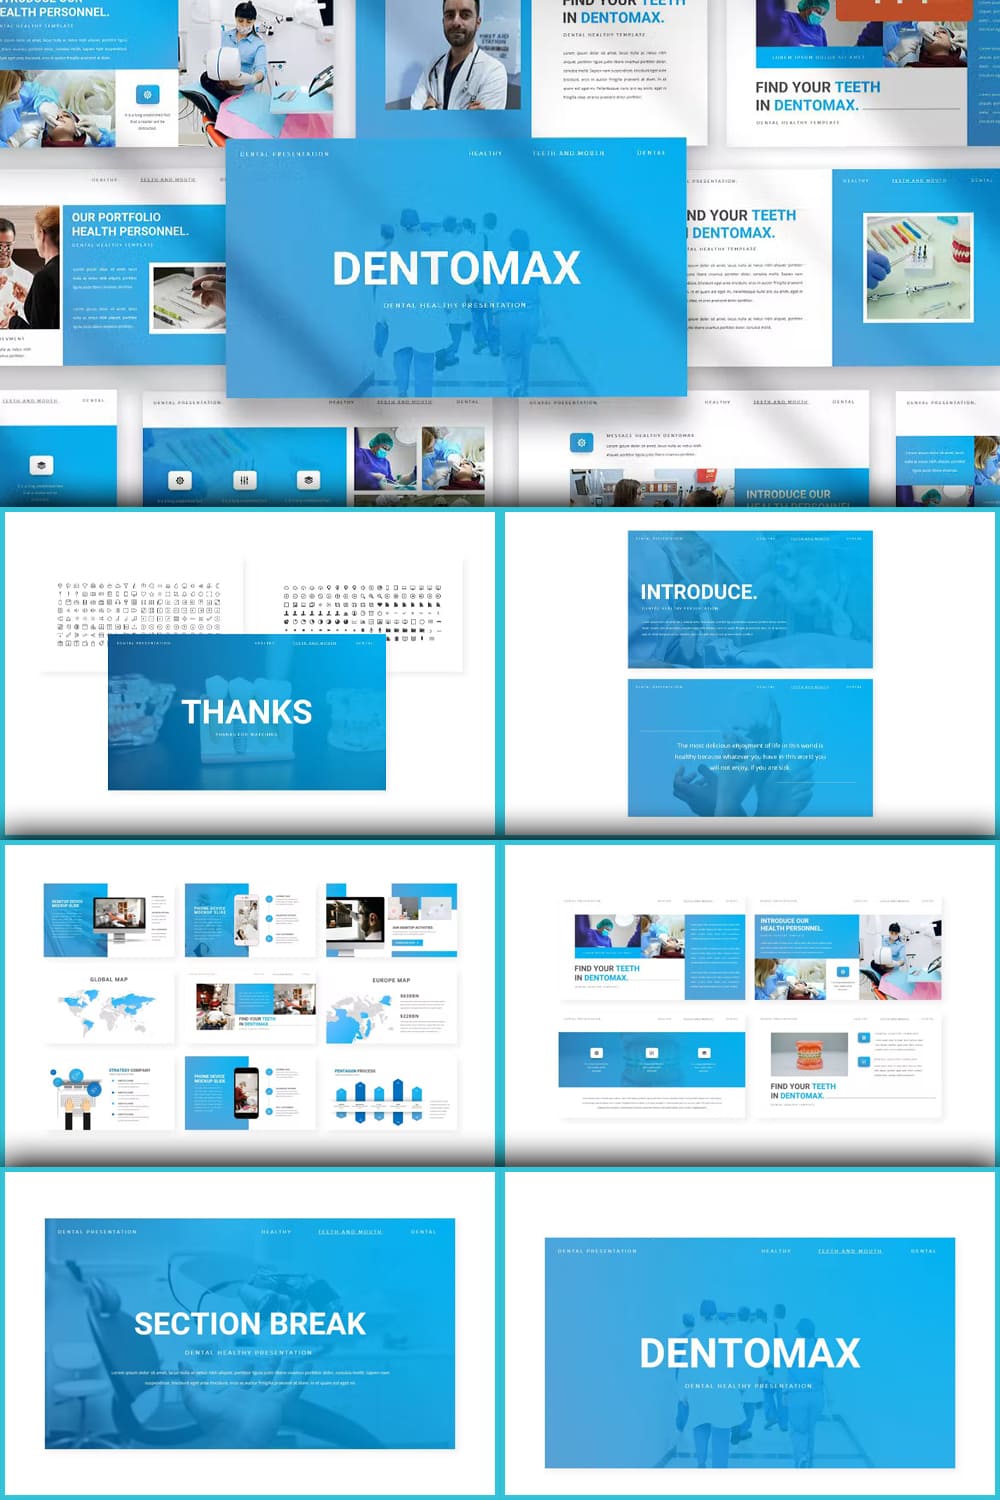 Pack of images of adorable presentation slides on the topic of dentistry.